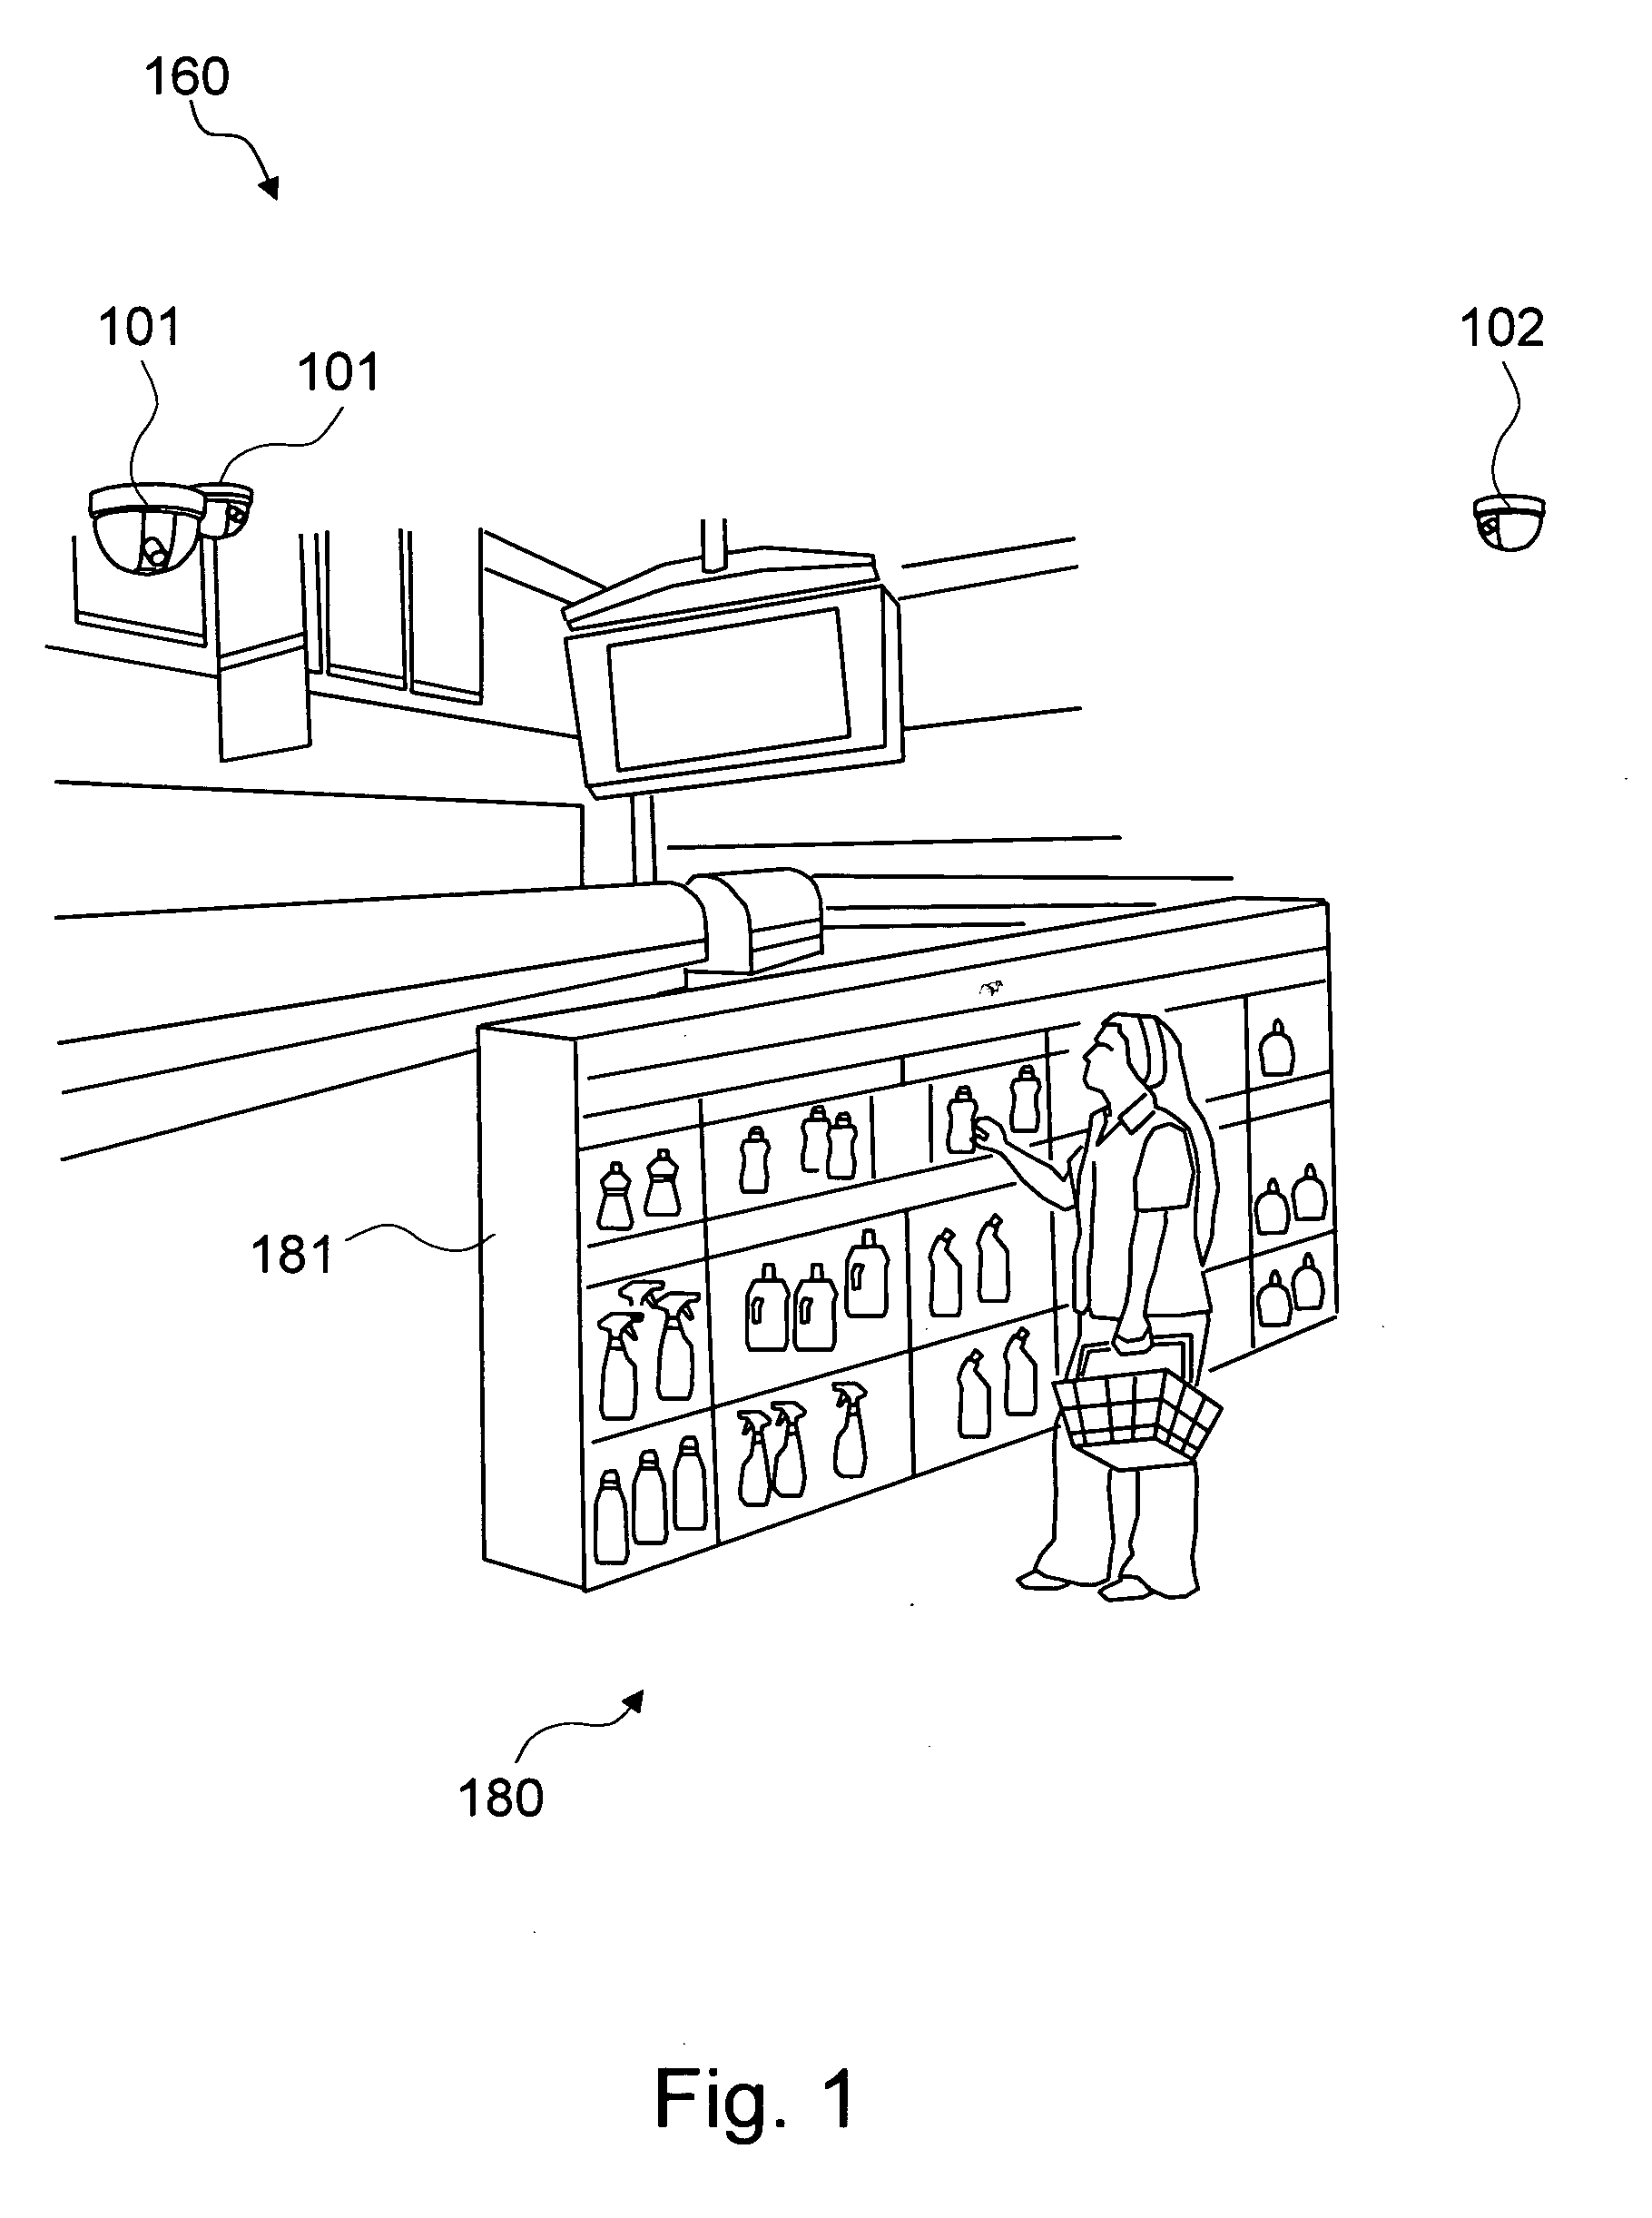 Method and system for automatically analyzing categories in a physical space based on the visual characterization of people